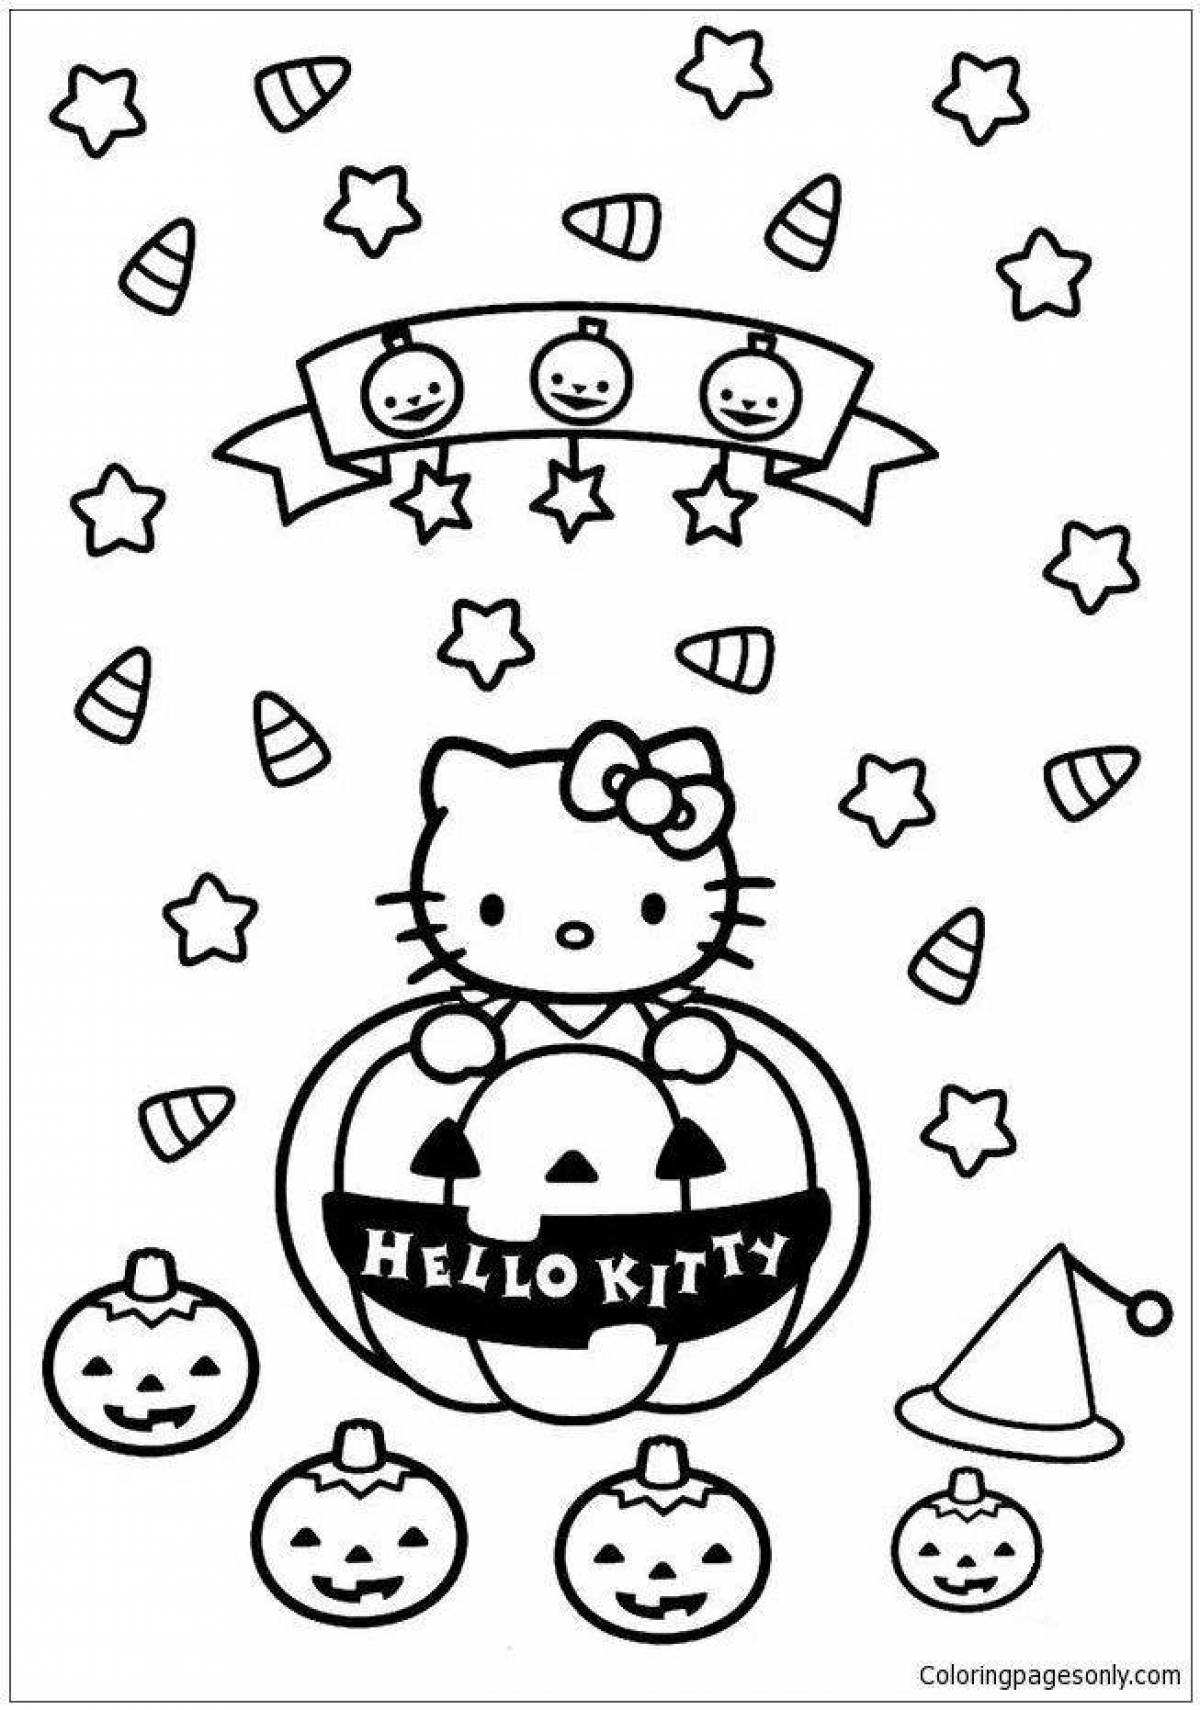 Shocking halloween kitty coloring page